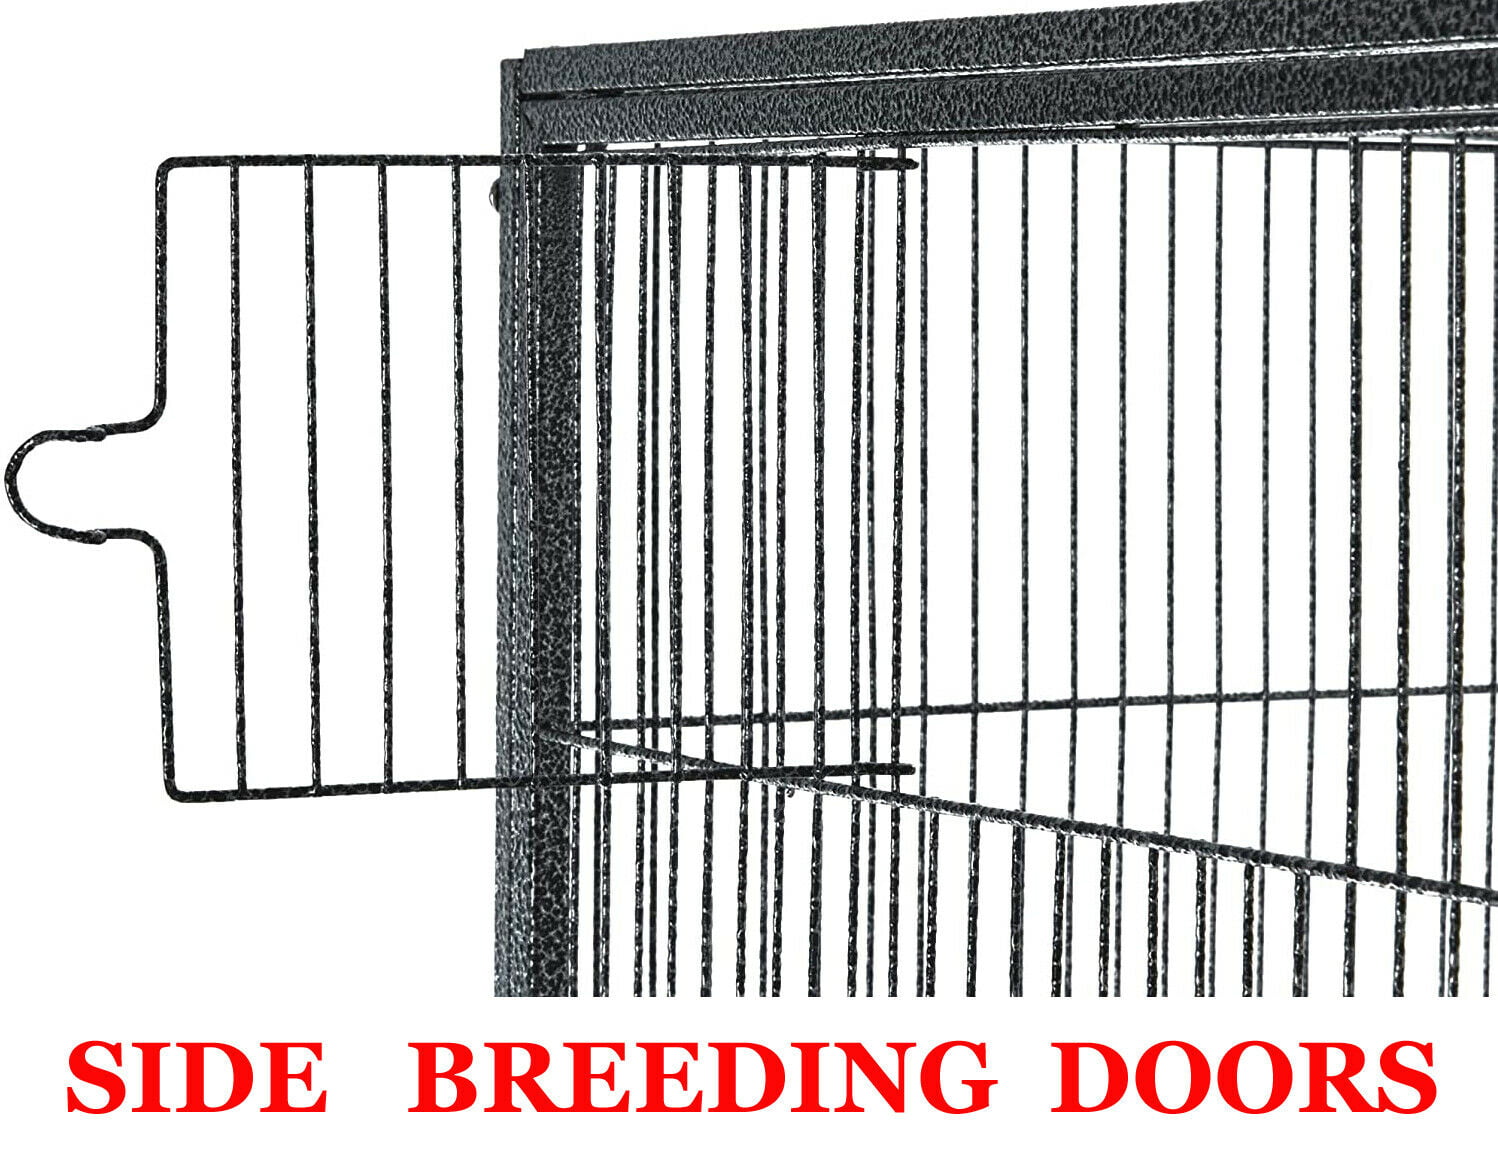 76 Large Double Stackable Wrought Iron Breeding Bird Flight Parrot Cockatiel Conure Breeder Cage Nesting Doors with Rolling Stand 32 x 19 x 76H inches, White Vein 